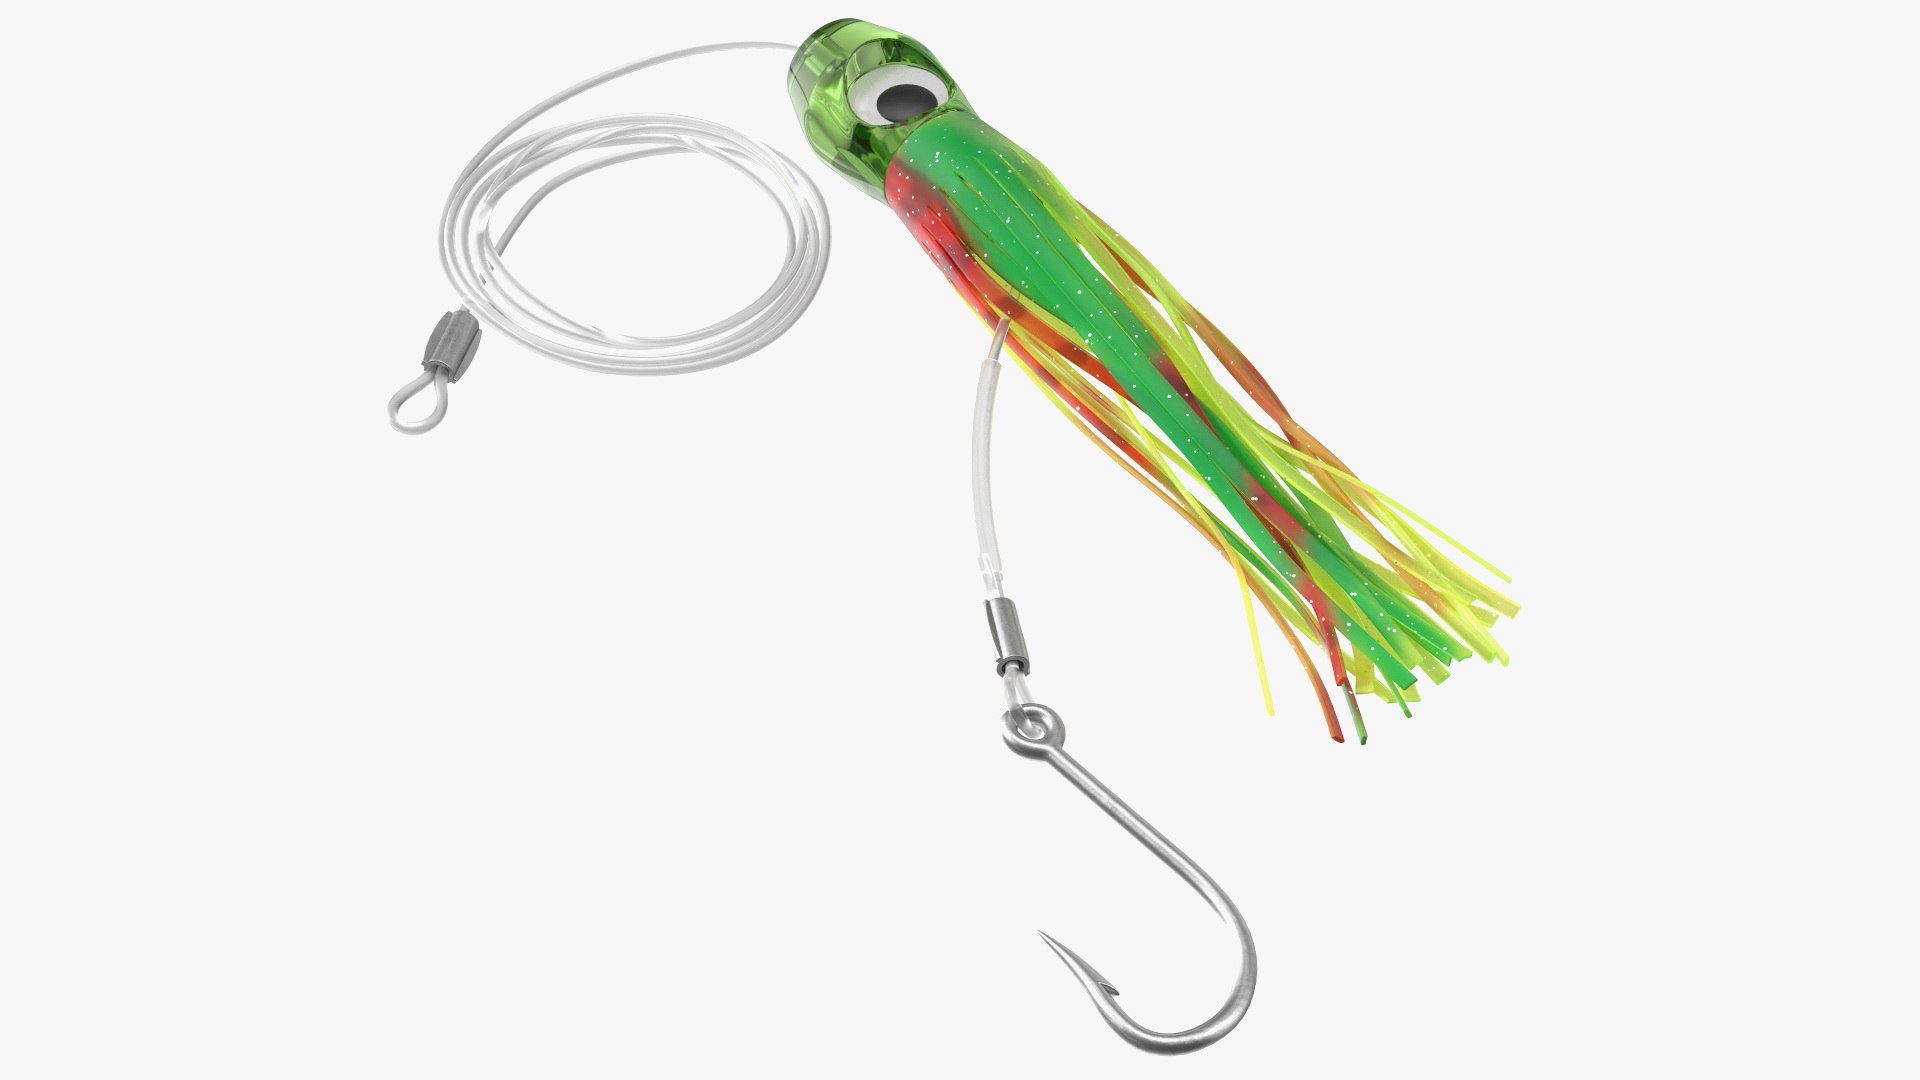 Trolling Skirts For Sale  Buy Skirted Lures at Australia's